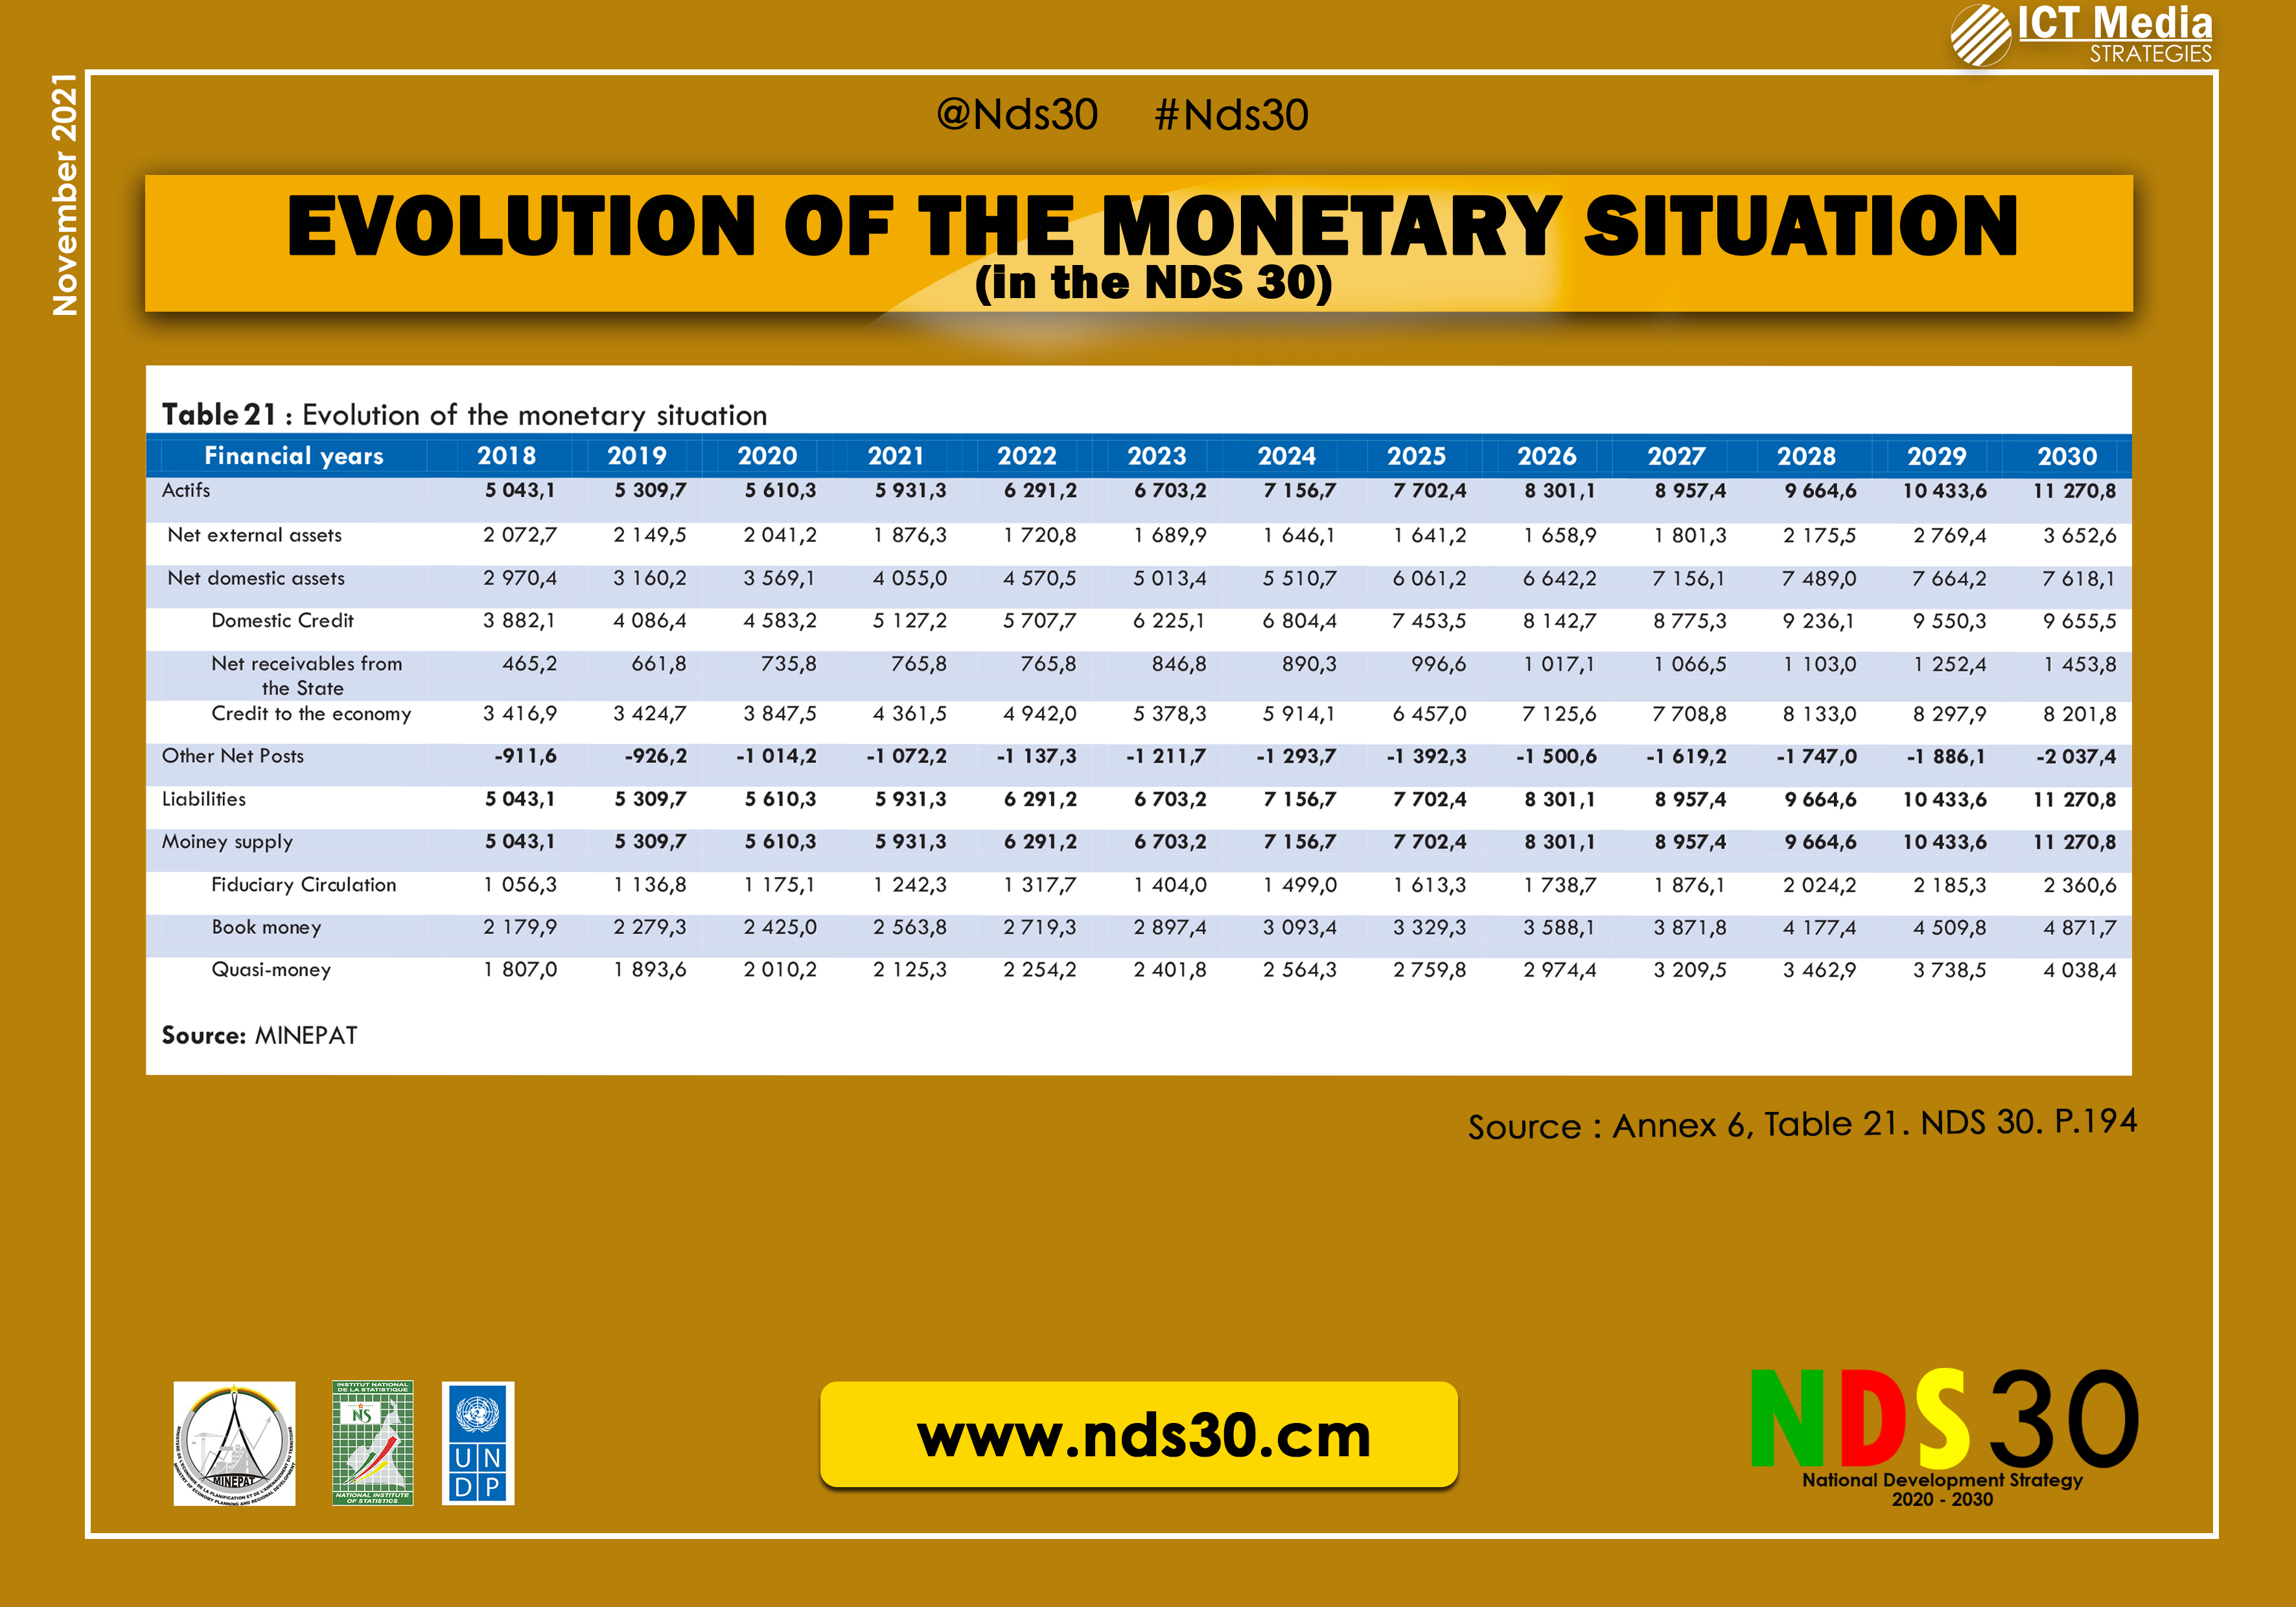 Table 21 Evolution of the monetary situation in the NDS 30